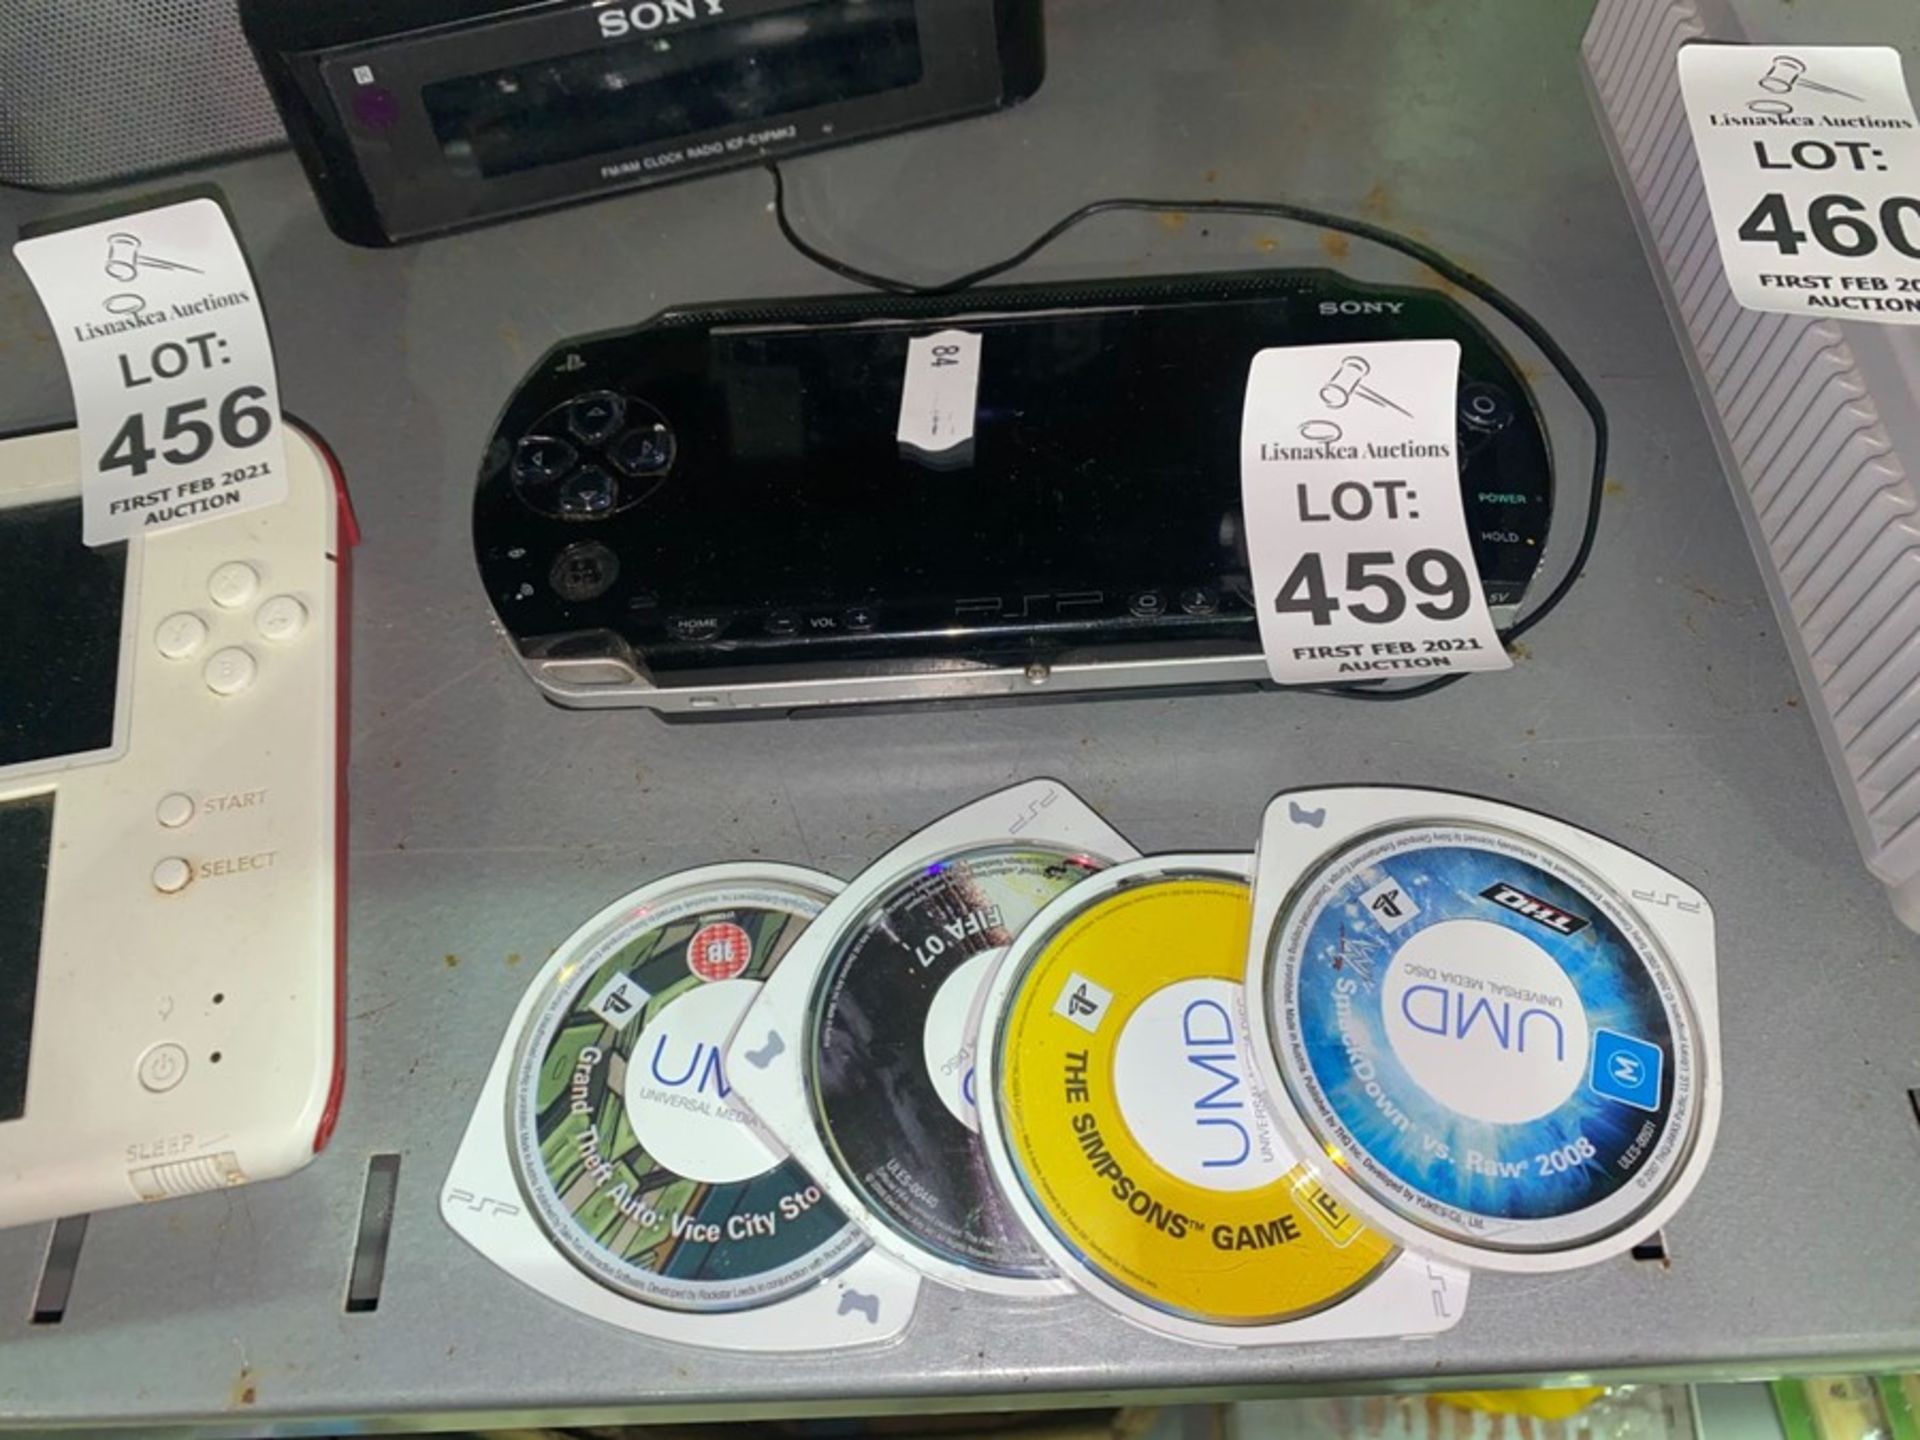 PSP GAME WITH GAMES NO CHARGER (S.A.S.)